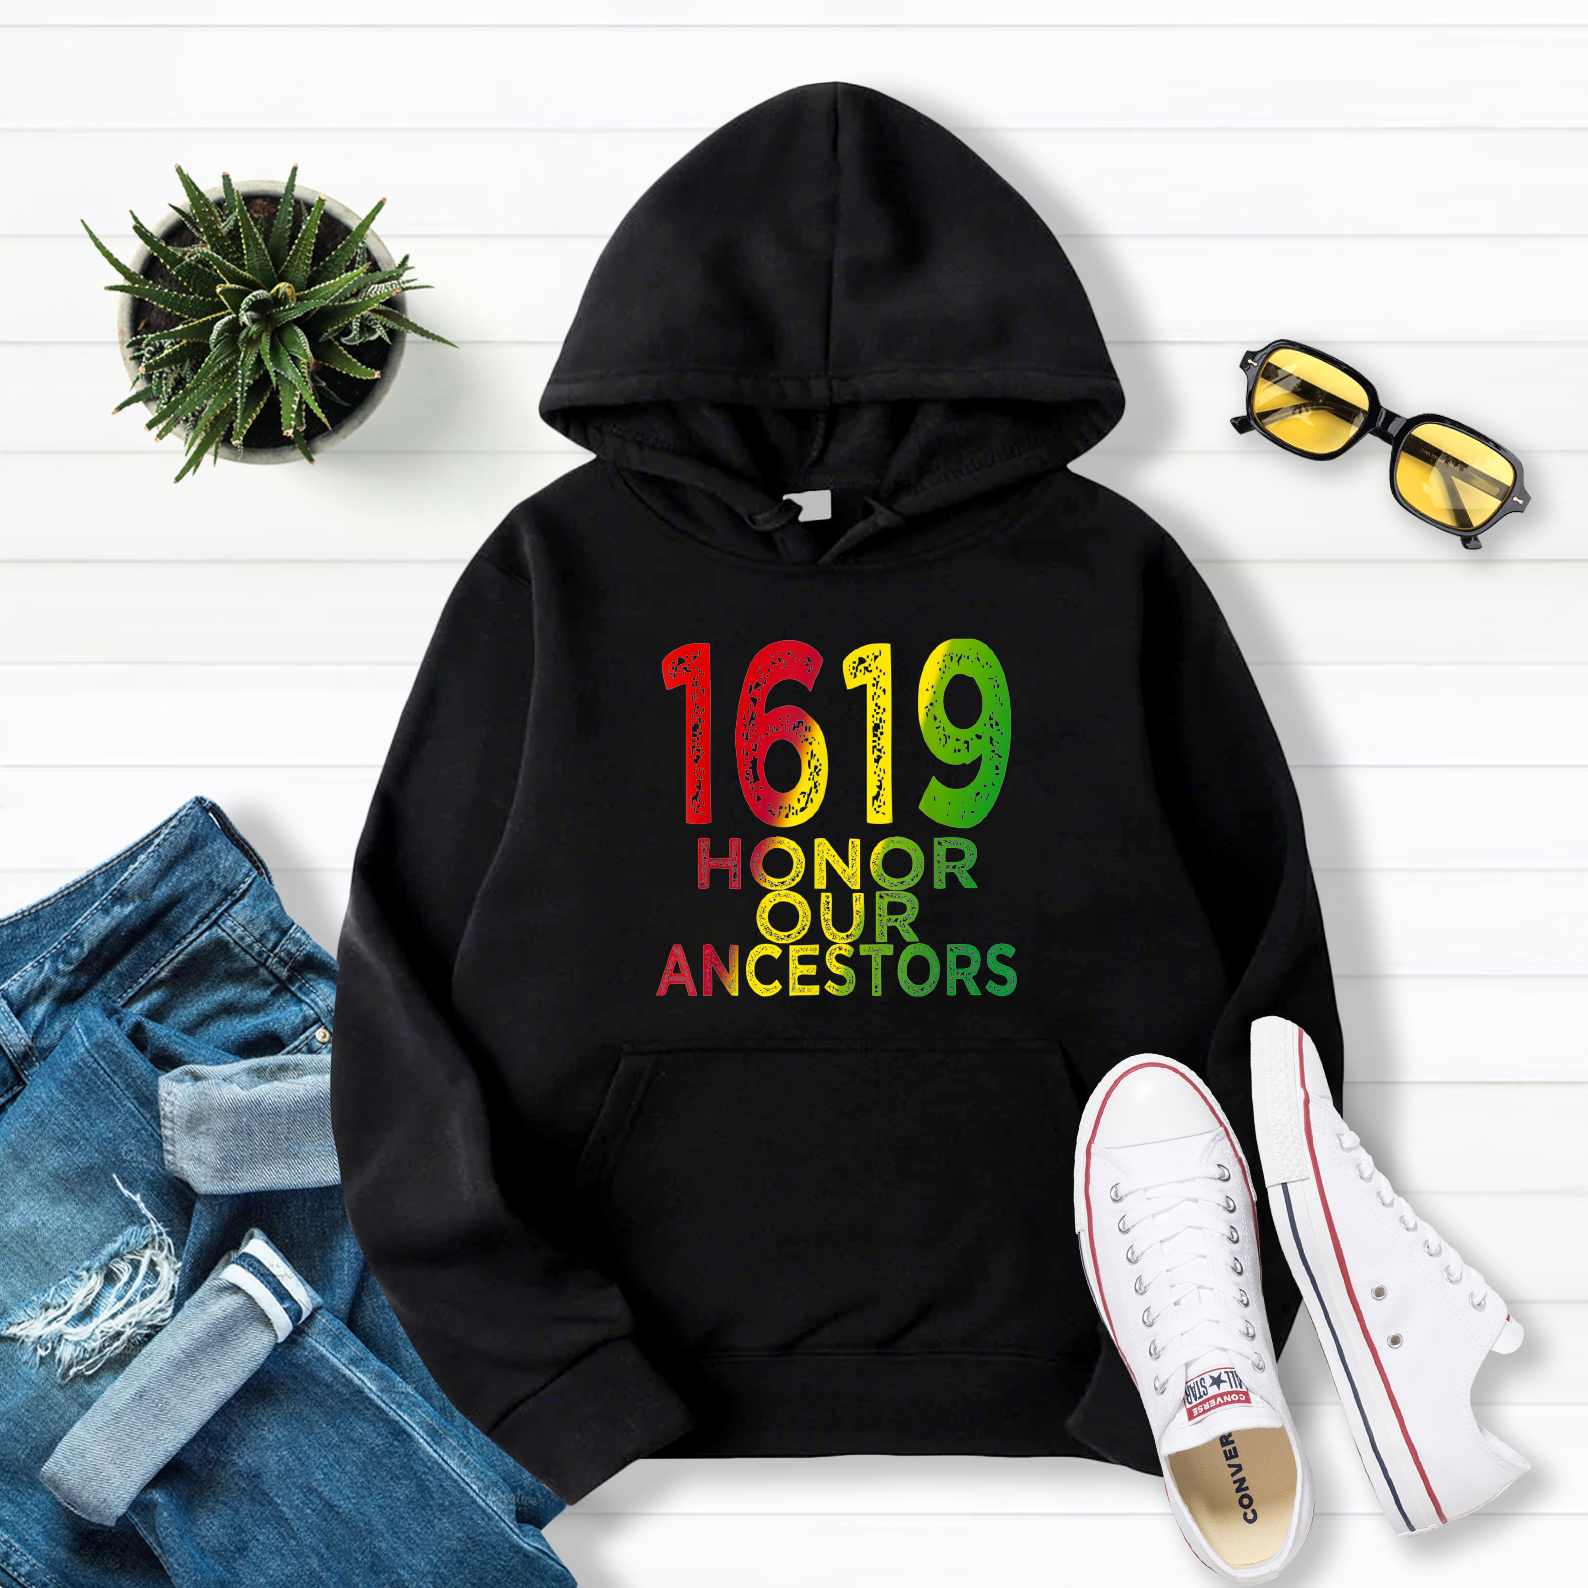 1619 Our Ancestors Project Black History Month Kwanzaa Gift Hoodie Pullover Hoodie Black S-5XL